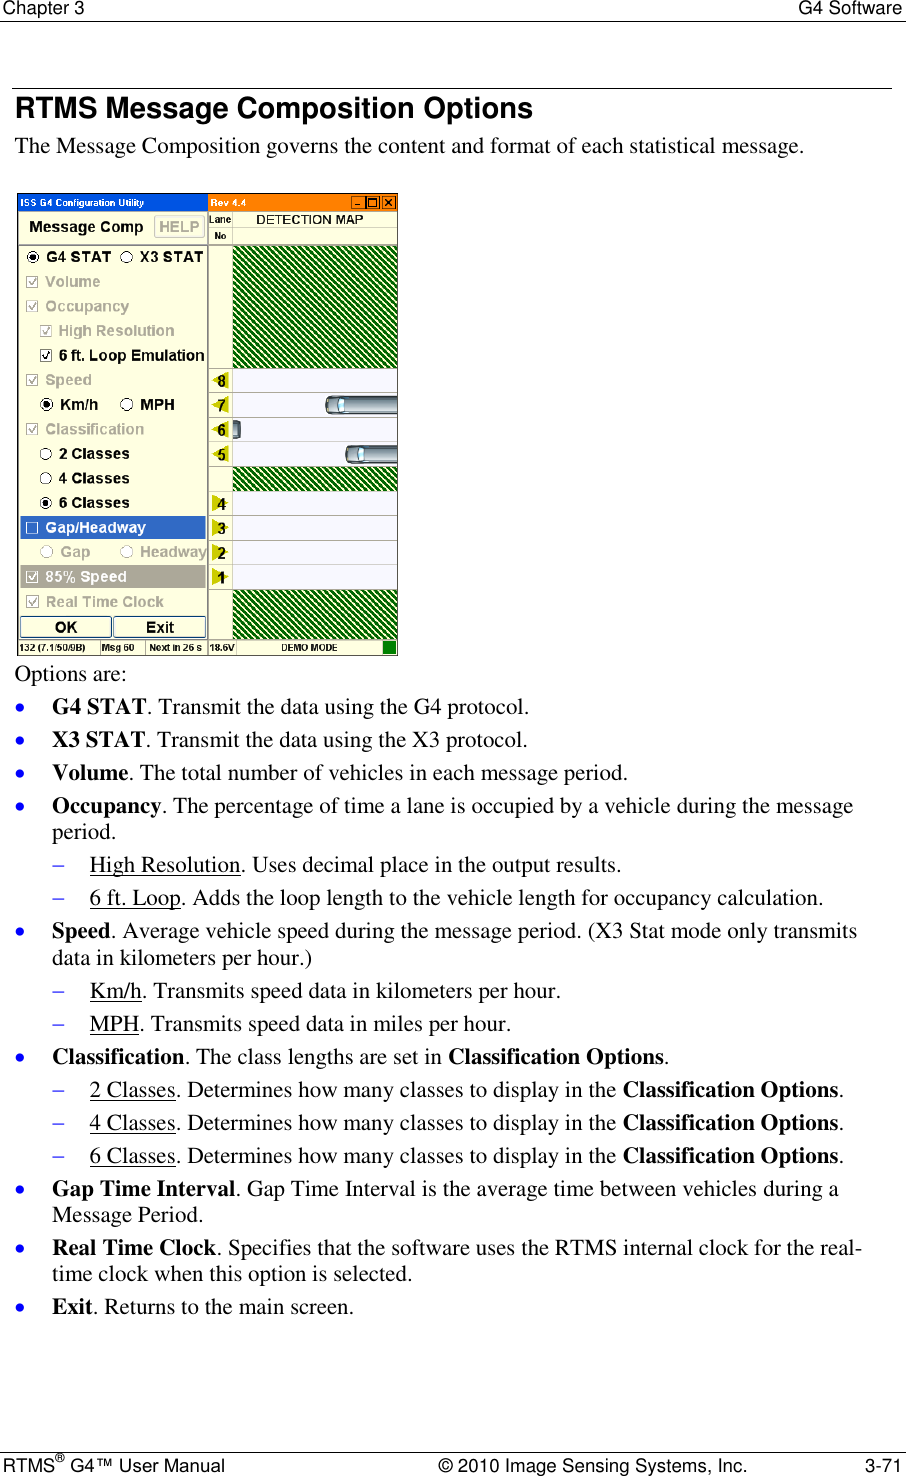 Chapter 3  G4 Software RTMS® G4™ User Manual  © 2010 Image Sensing Systems, Inc.  3-71 RTMS Message Composition Options The Message Composition governs the content and format of each statistical message.   Options are:  G4 STAT. Transmit the data using the G4 protocol.  X3 STAT. Transmit the data using the X3 protocol.  Volume. The total number of vehicles in each message period.  Occupancy. The percentage of time a lane is occupied by a vehicle during the message period.   High Resolution. Uses decimal place in the output results.  6 ft. Loop. Adds the loop length to the vehicle length for occupancy calculation.  Speed. Average vehicle speed during the message period. (X3 Stat mode only transmits data in kilometers per hour.)   Km/h. Transmits speed data in kilometers per hour.  MPH. Transmits speed data in miles per hour.  Classification. The class lengths are set in Classification Options.   2 Classes. Determines how many classes to display in the Classification Options.  4 Classes. Determines how many classes to display in the Classification Options.  6 Classes. Determines how many classes to display in the Classification Options.  Gap Time Interval. Gap Time Interval is the average time between vehicles during a Message Period.  Real Time Clock. Specifies that the software uses the RTMS internal clock for the real-time clock when this option is selected.  Exit. Returns to the main screen. 